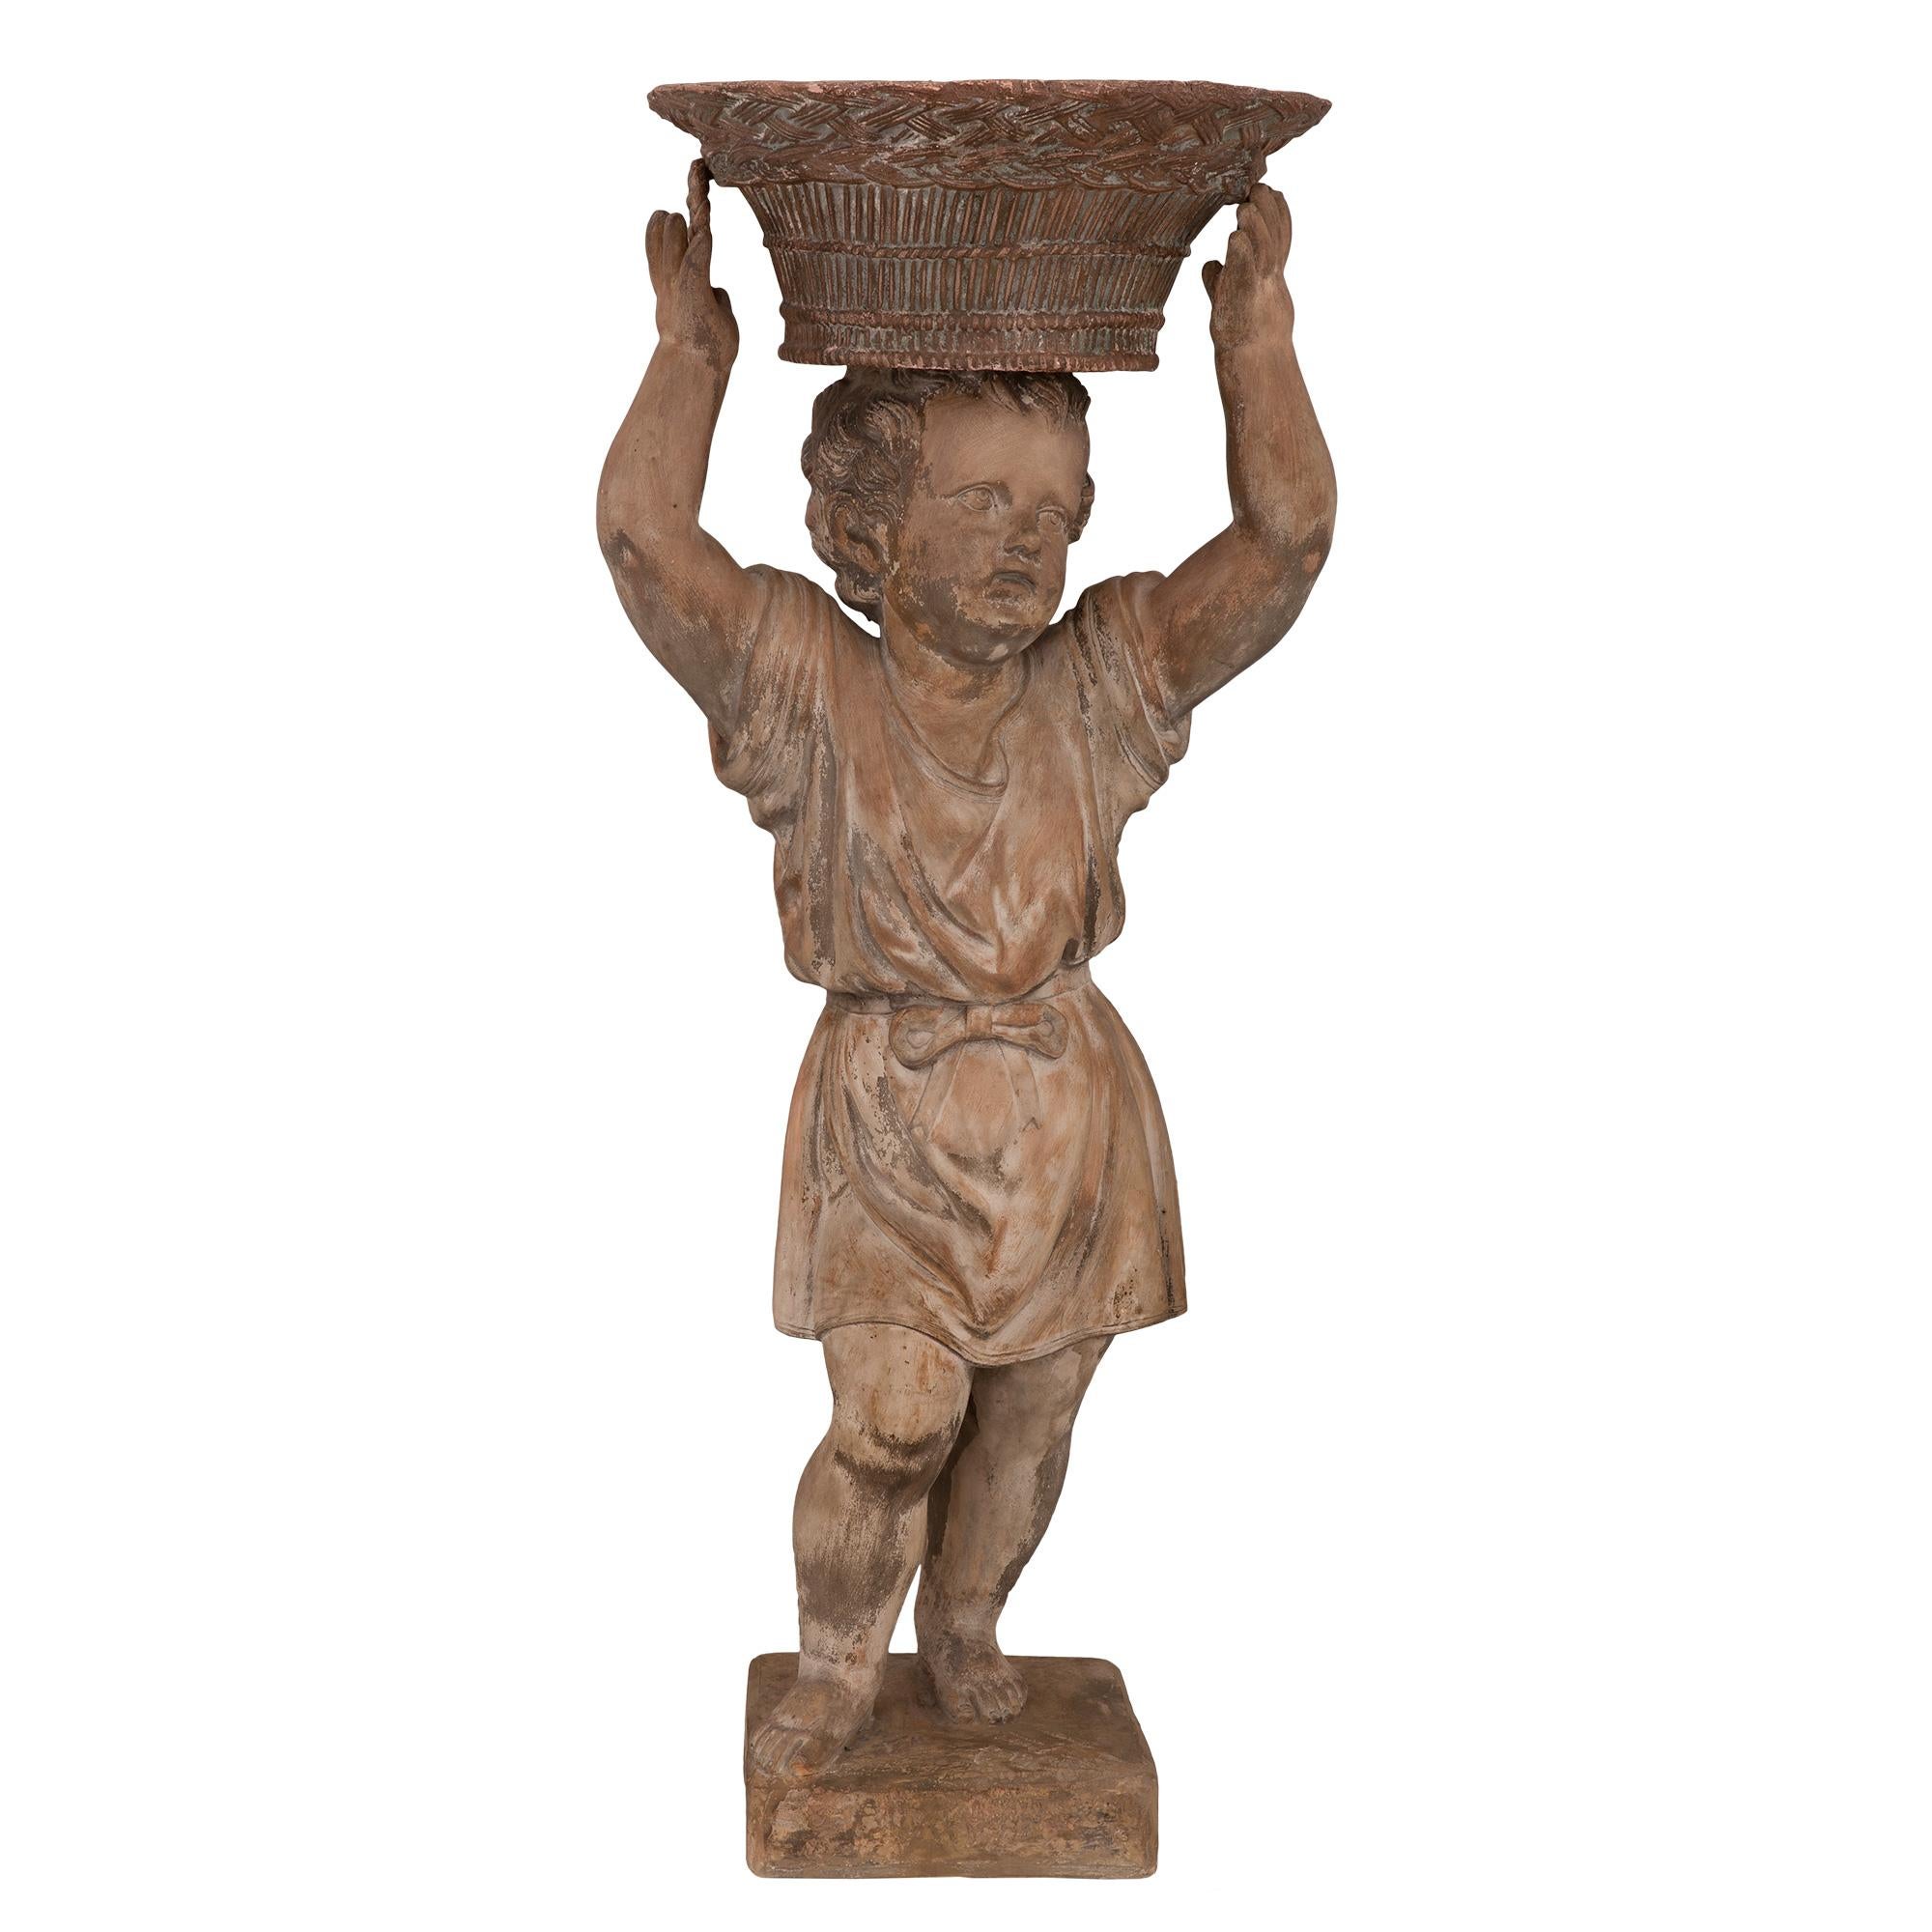 A charming Continental 18th century terra cotta statue/planter of a young boy. The statue is raised on a square terra cotta base. Above, the young boy stands dressed in a flowing tunic tied at the waist with a ribbon. He stands with his arms raised